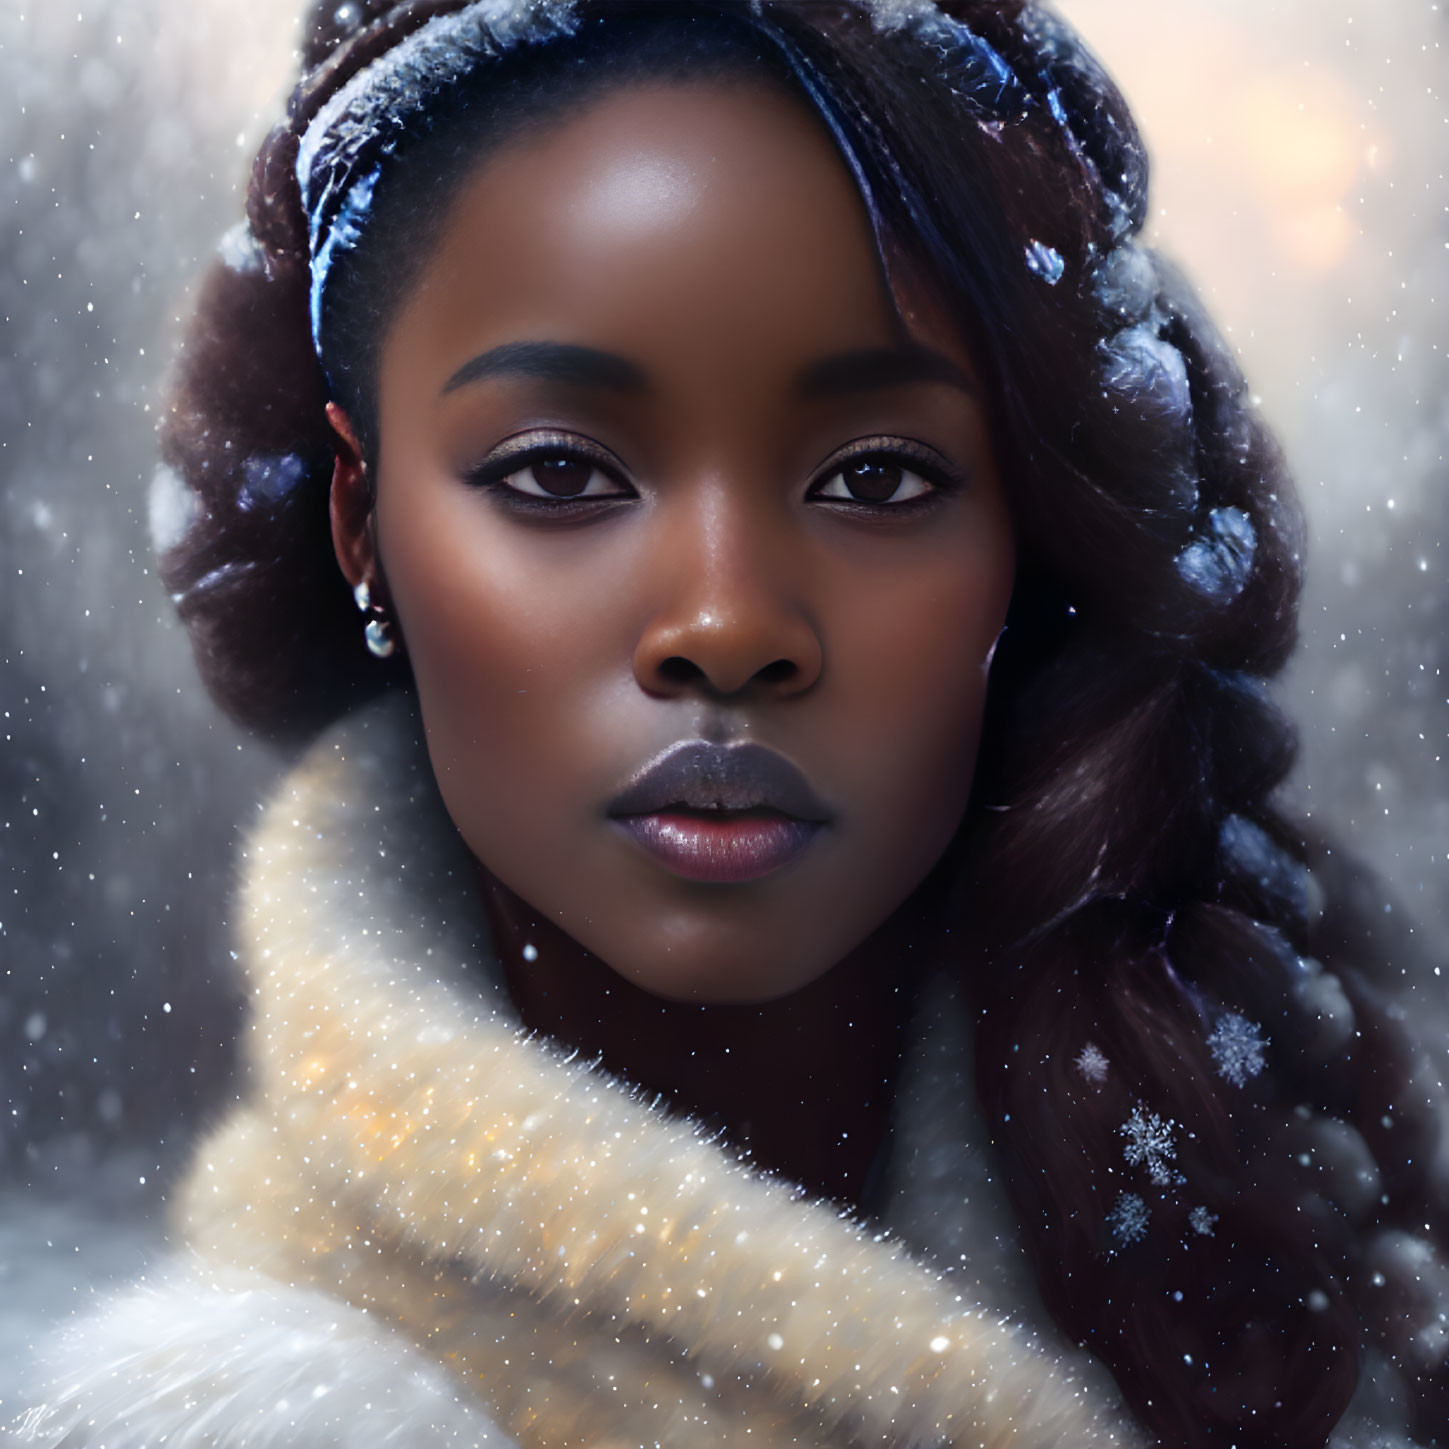 Portrait of woman with dark skin in fur coat and headband, snowflakes in hair